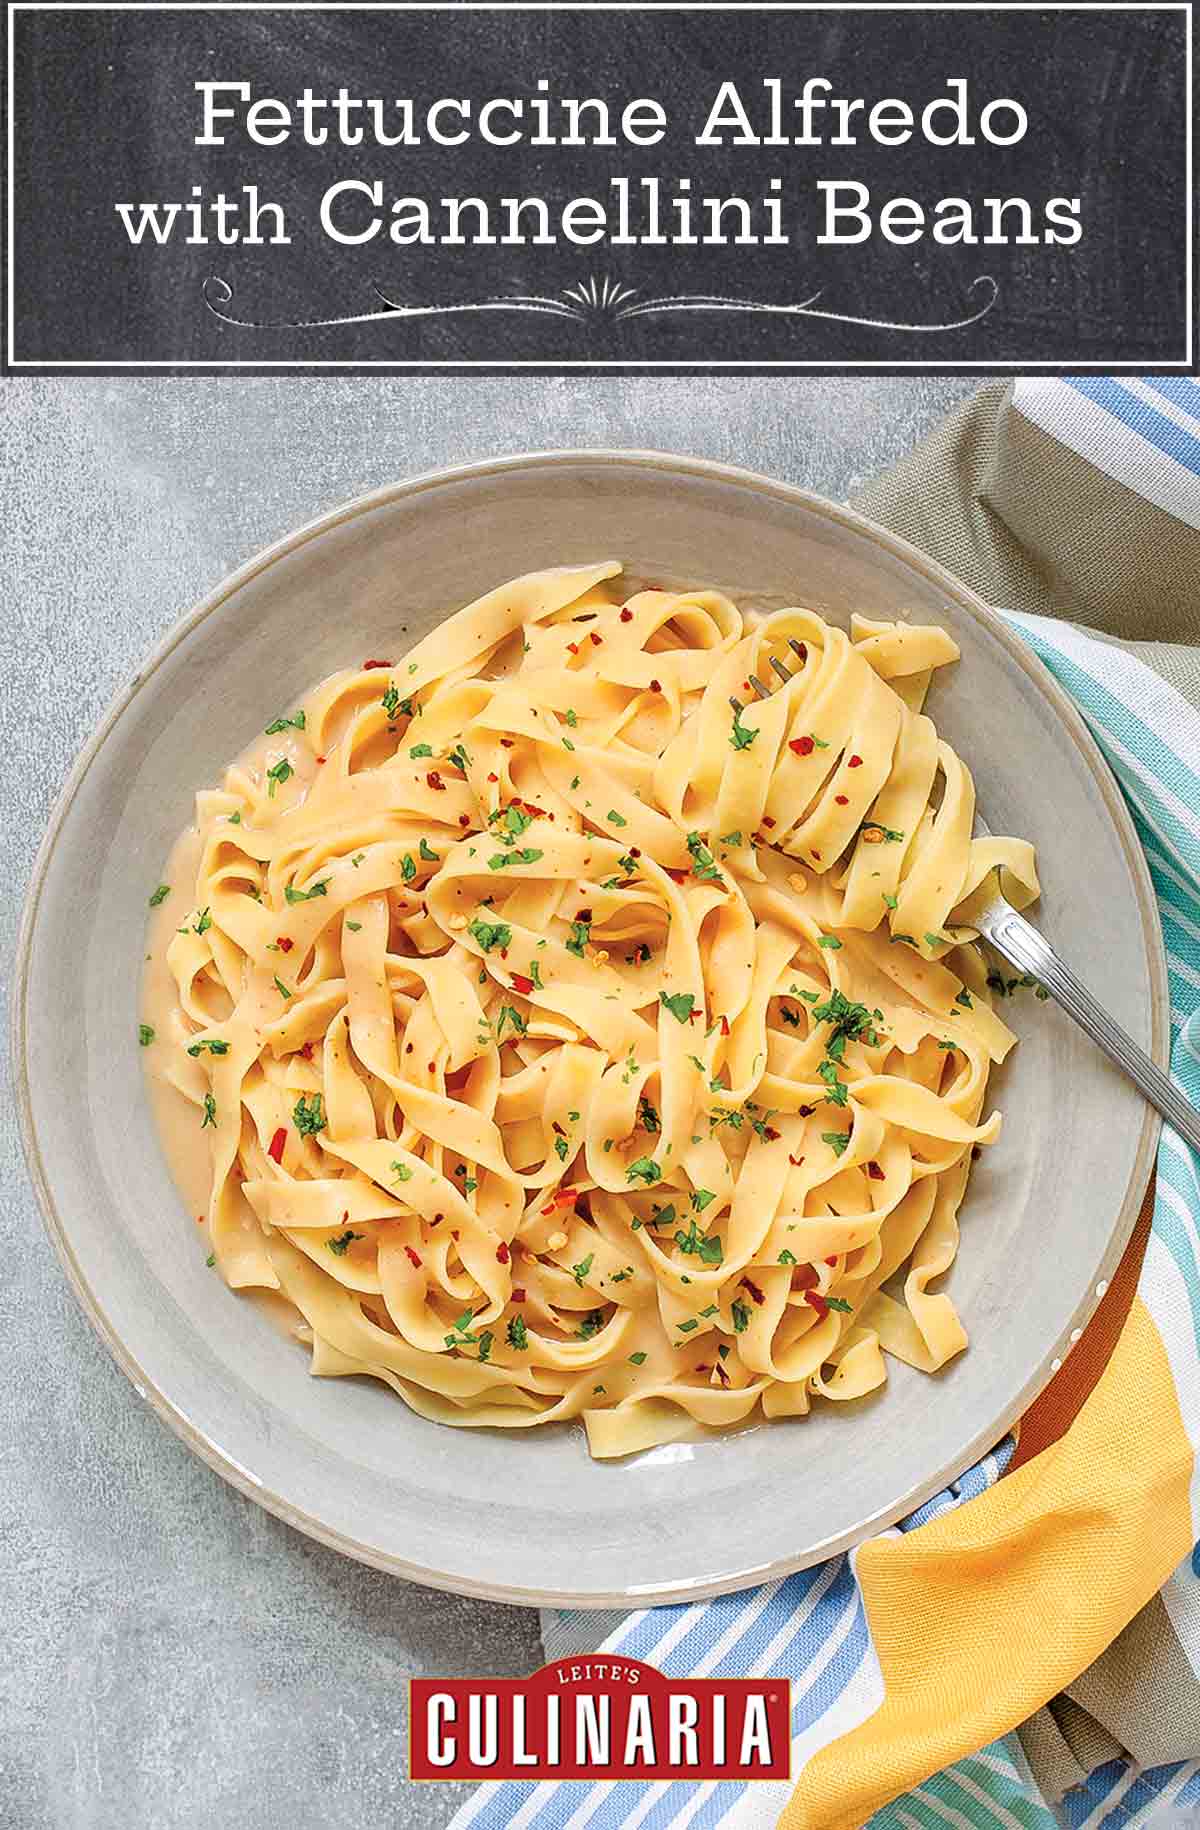 Fettuccine Alfredo with cannellini beans in a large white bowl with a fork, beside a striped cloth.